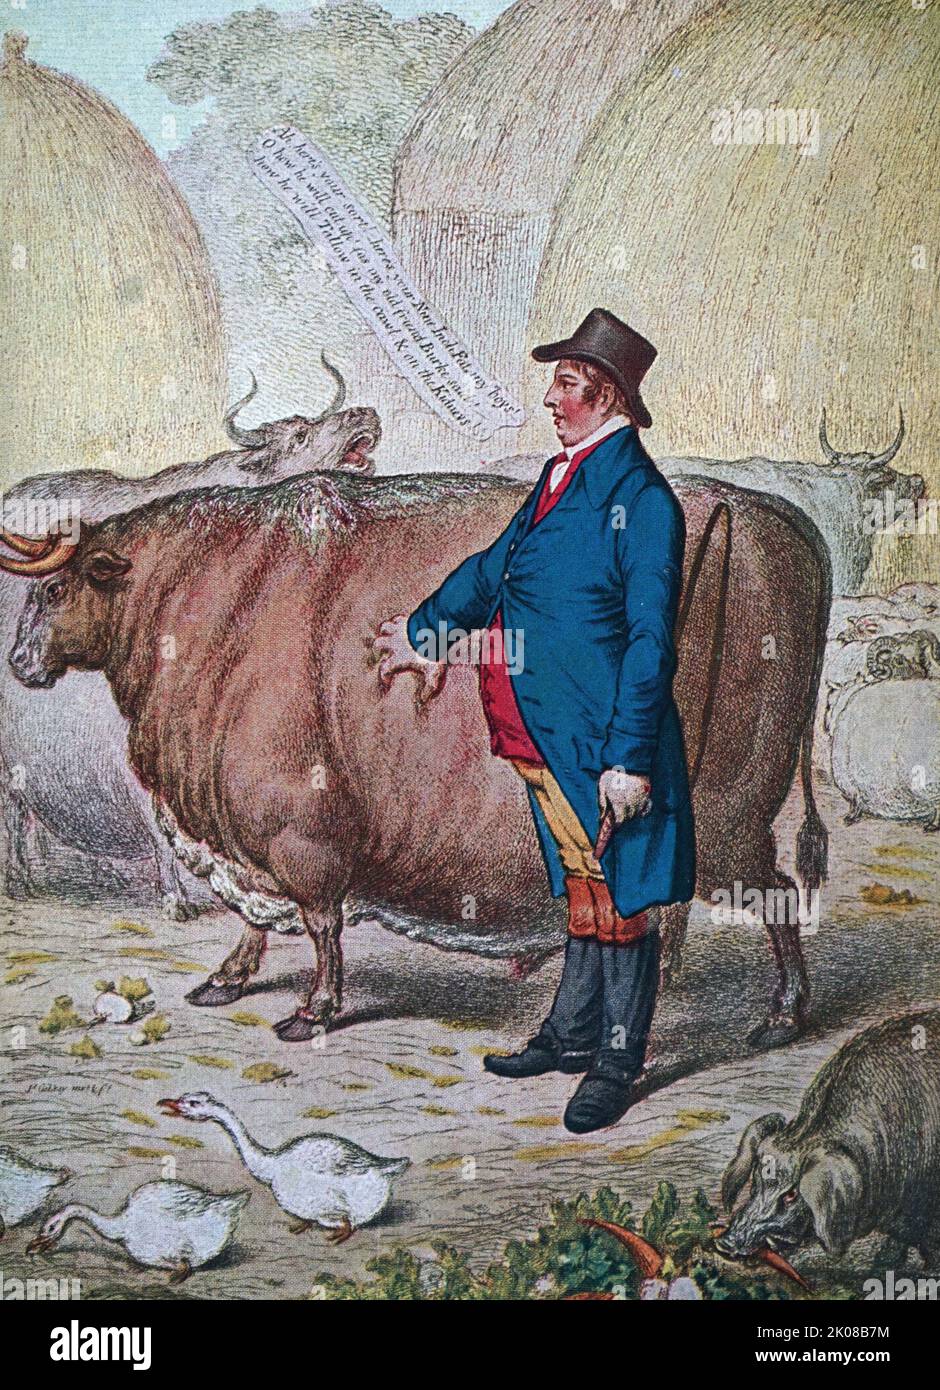 Cattle farmer in South Africa. Illustration by James Gillray Stock Photo